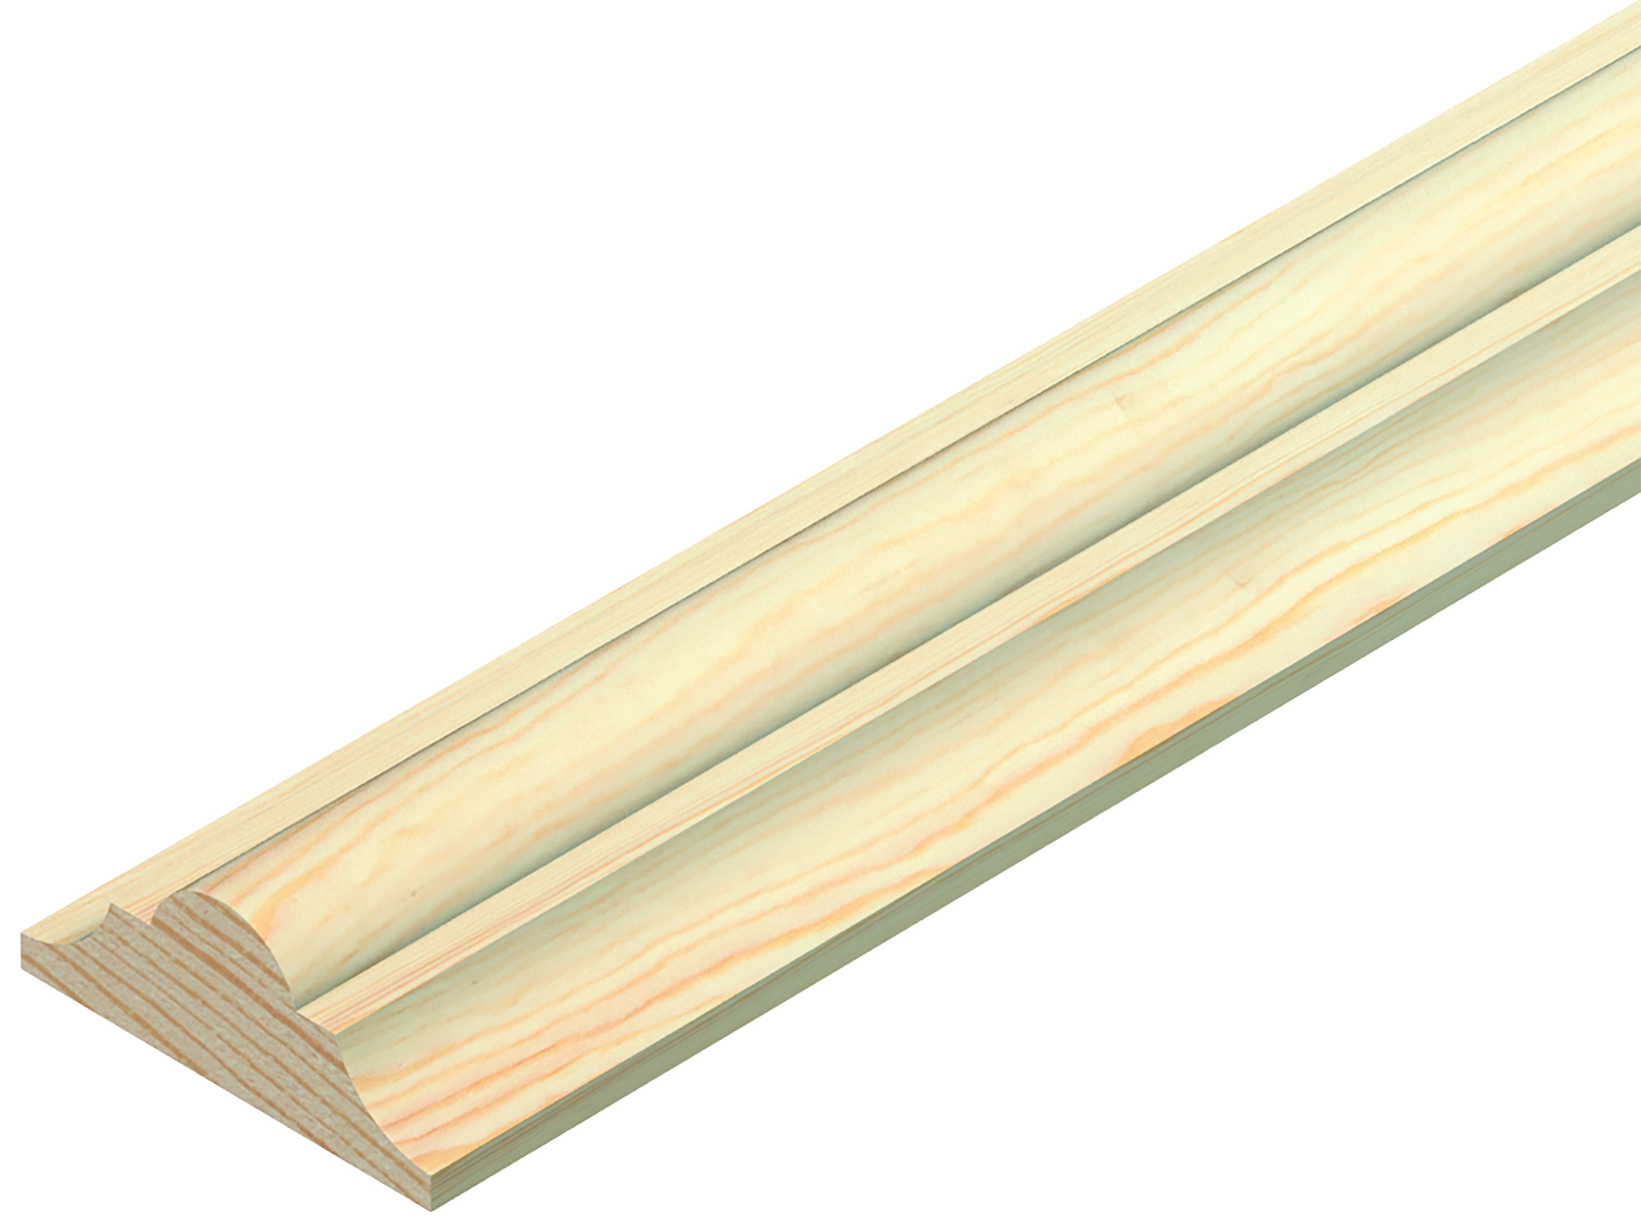 Image of Wickes Pine Double Astragal Moulding - 34 x 12 x 2400mm